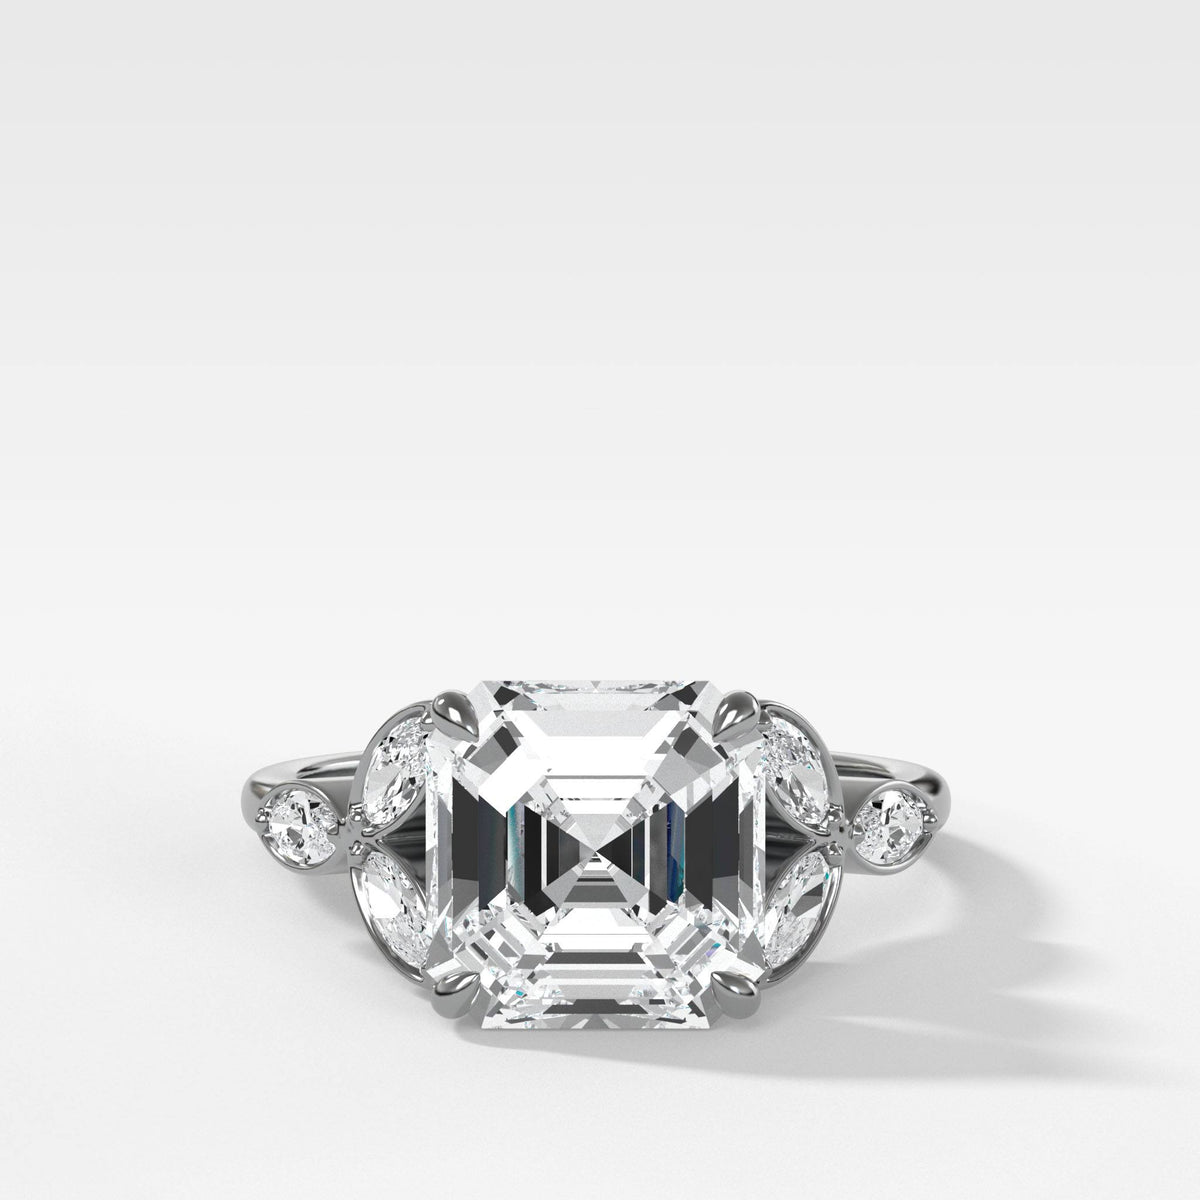 Laurel Ring With Asscher Cut by Good Stone in White Gold